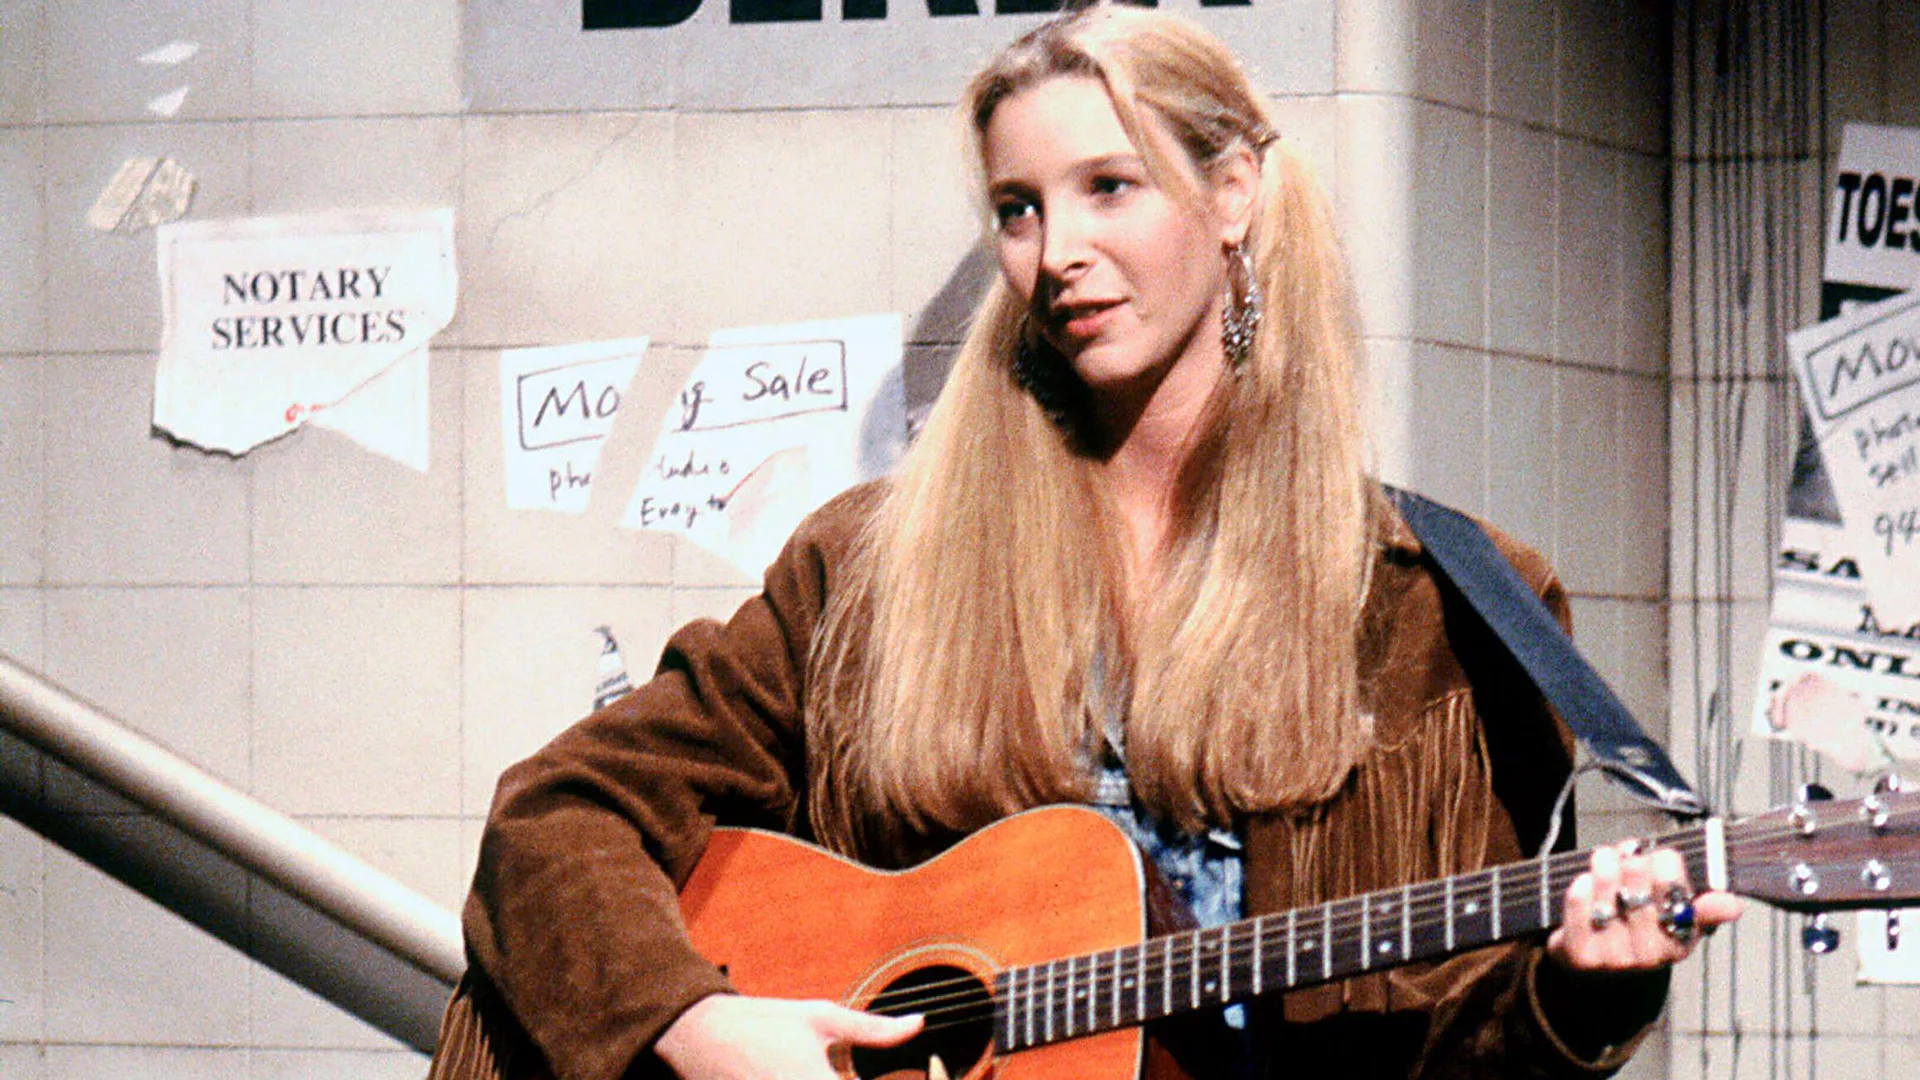 A photograph of the character Phoebe in Friends with a guitar against a stone wall with posters on it